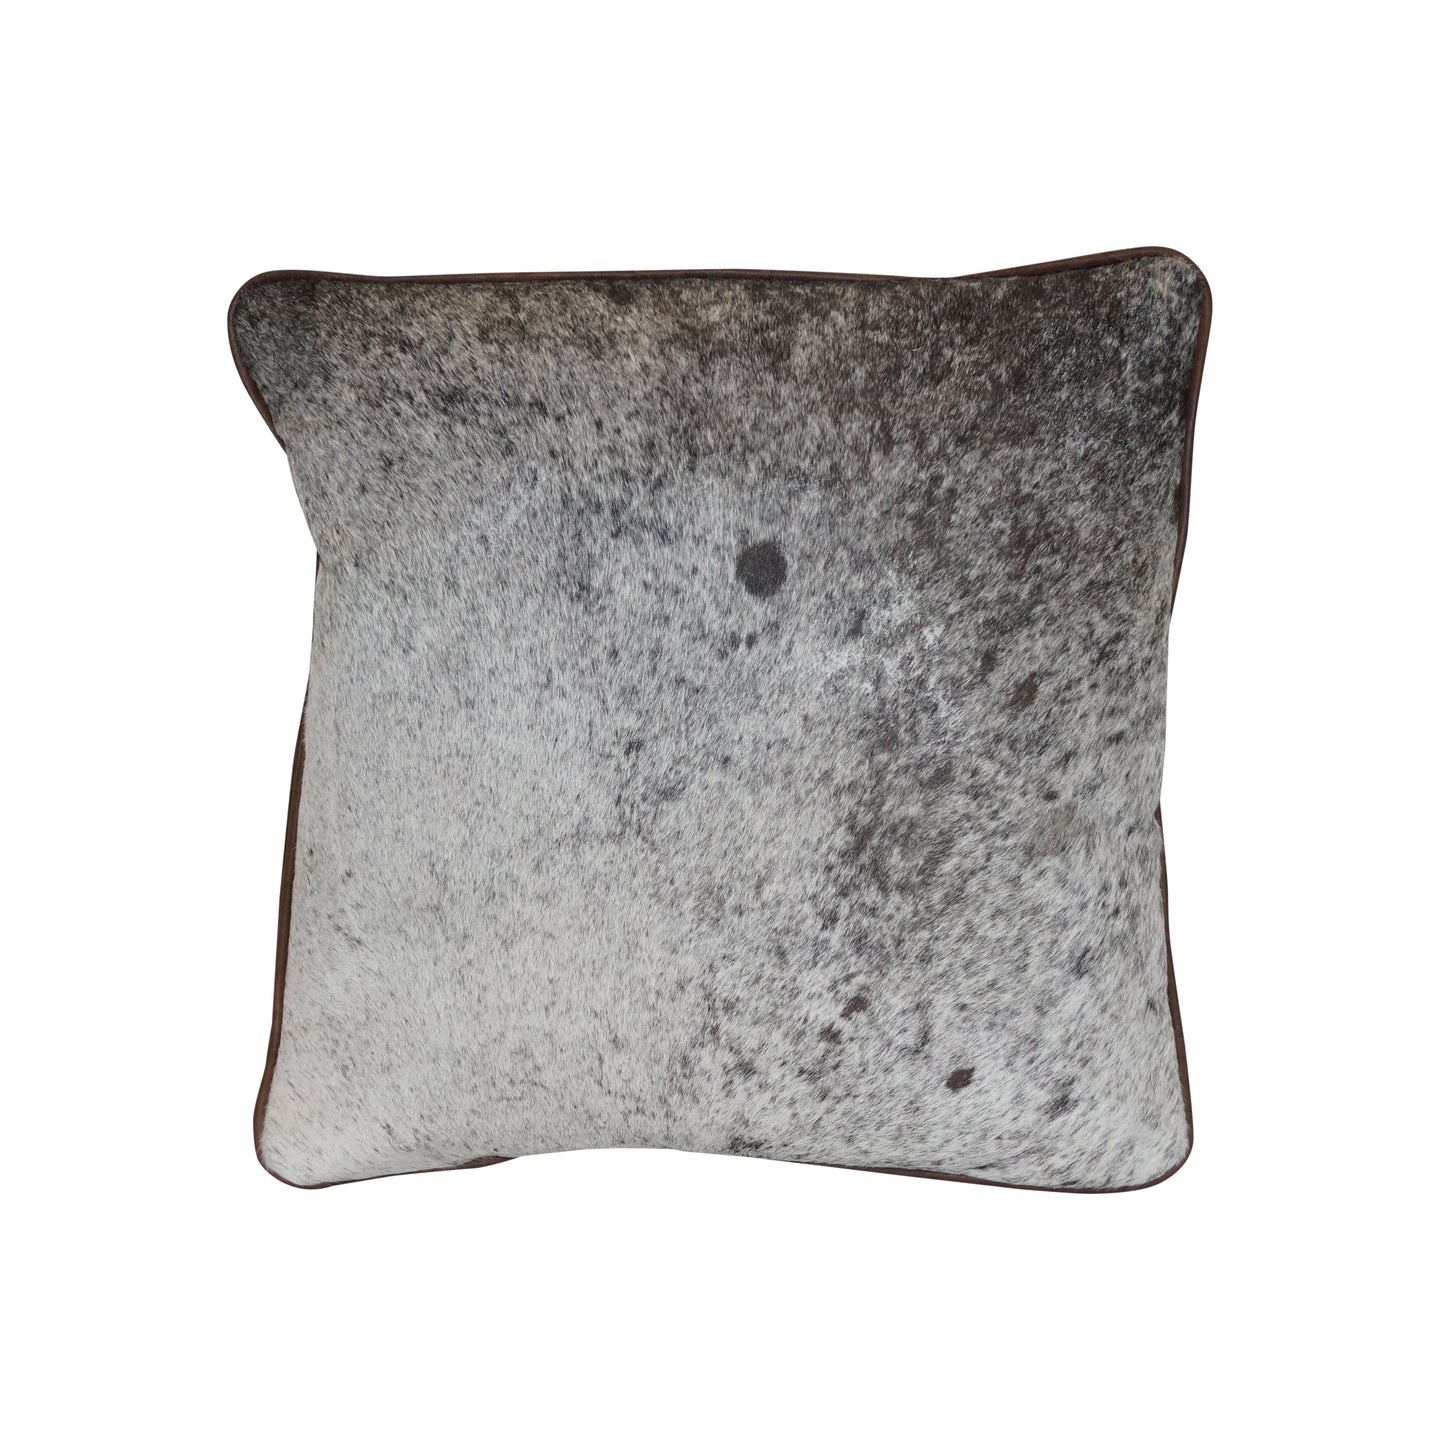 Cowhide Square Pillow - Black and White Speckle